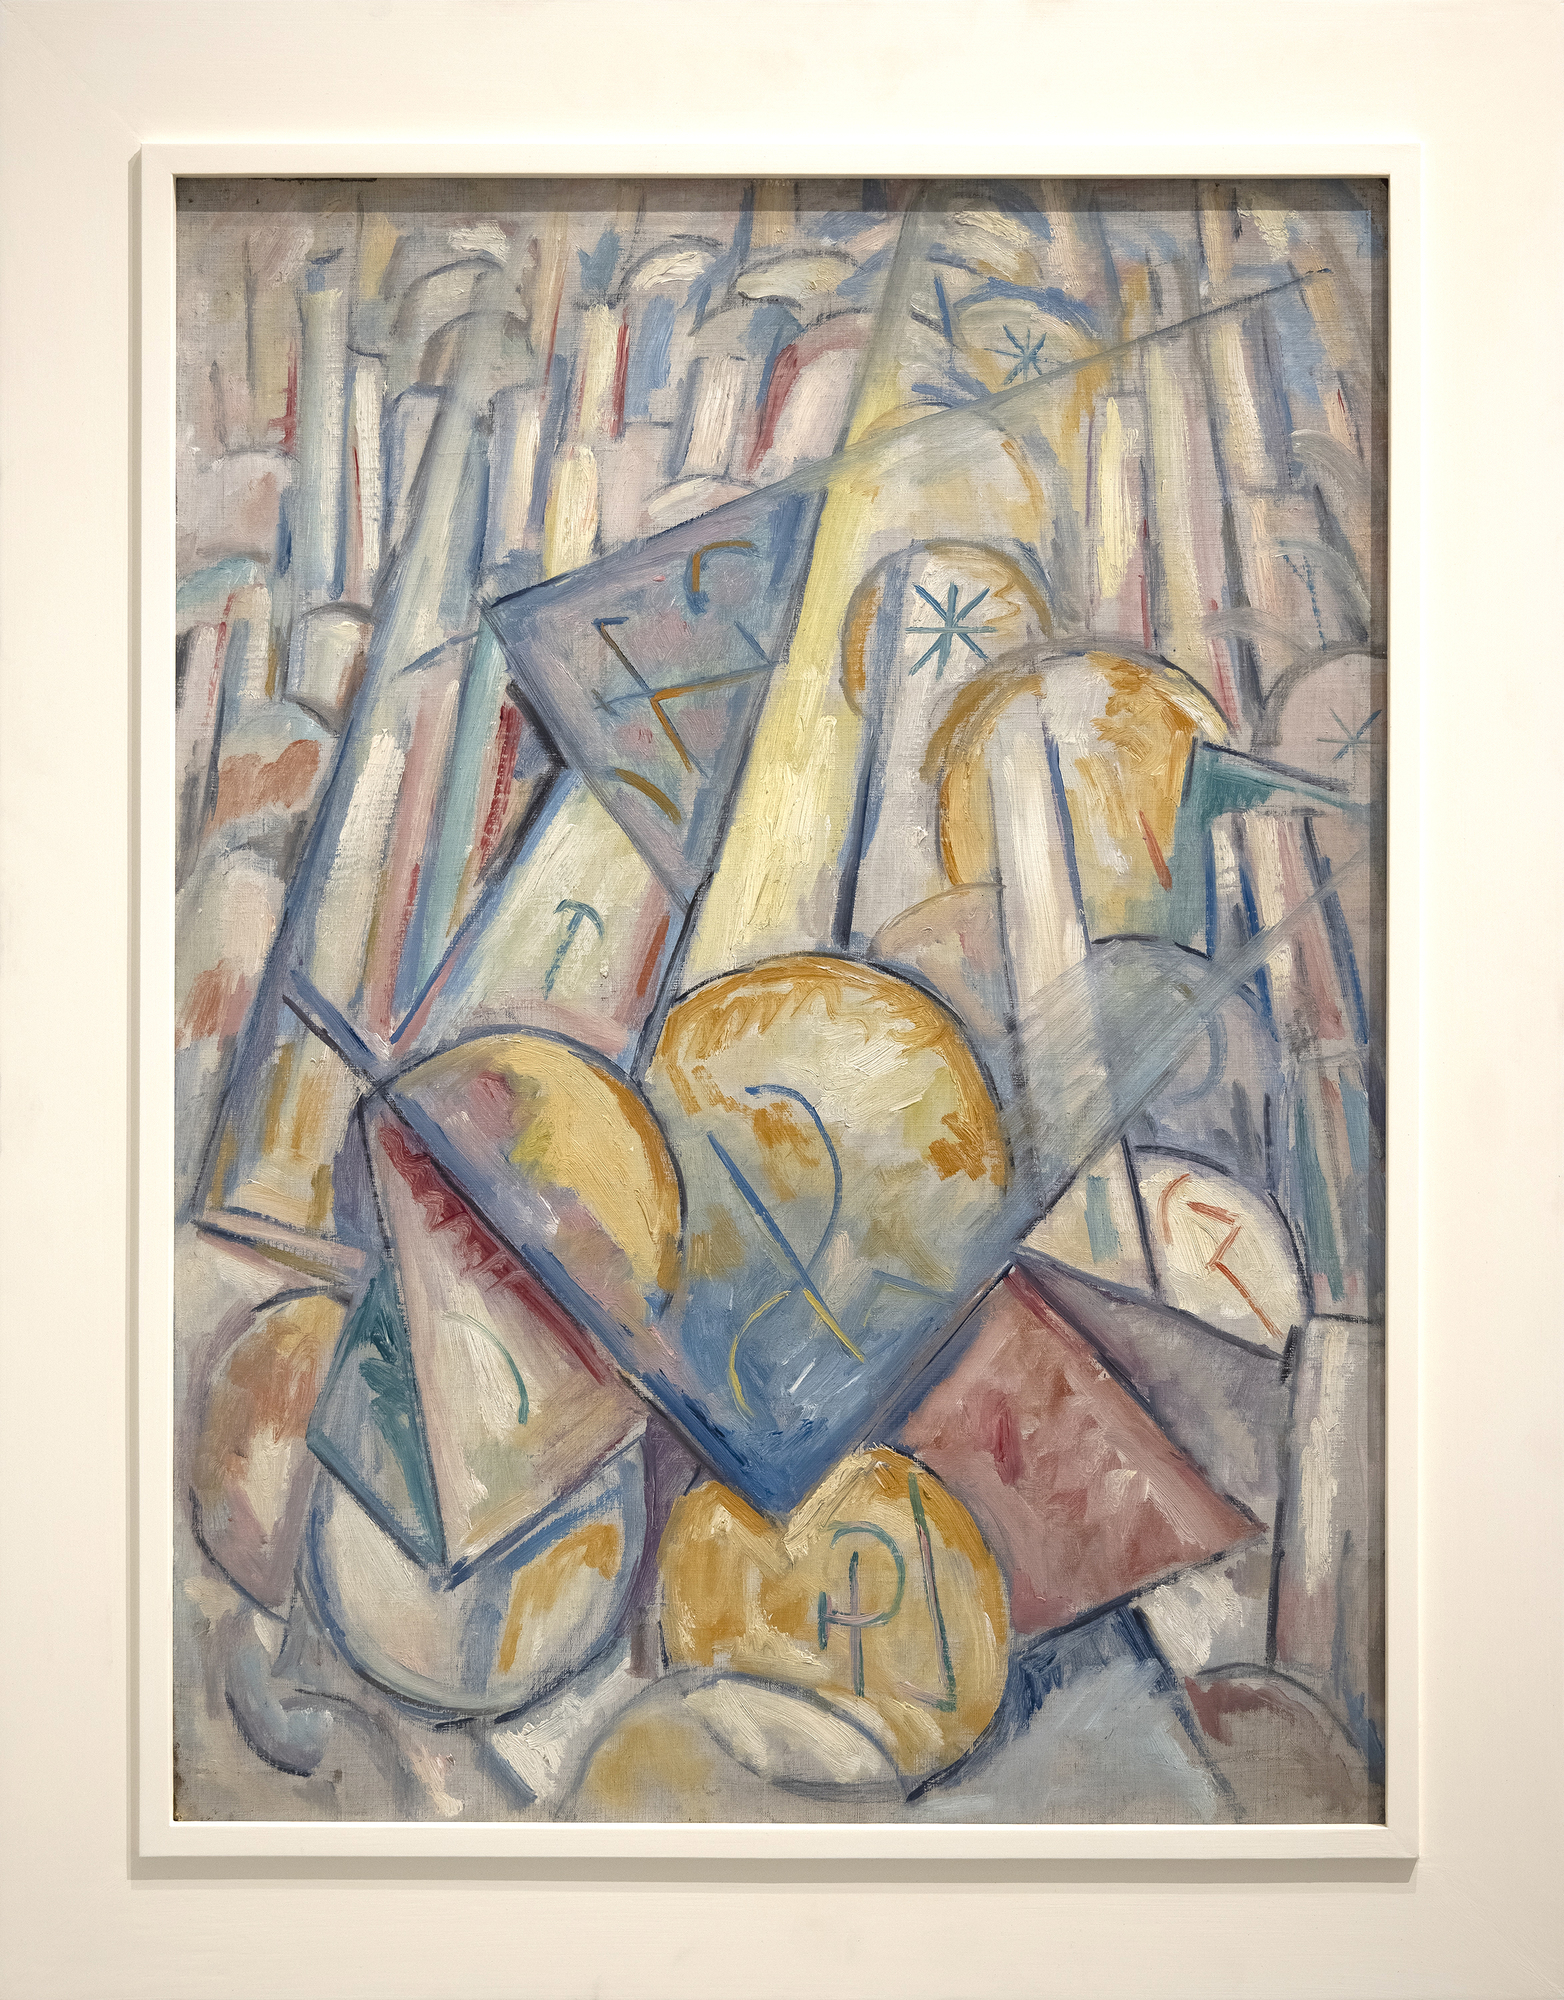 Shortly after arriving in Paris by April 1912, Marsden Hartley received an invitation. It had come from Gertrude Stein and what he saw at her 27 rue de Fleurus flat stunned him. Despite his presumptions and preparedness, “I had to get used to so much of everything all at once…a room full of staggering pictures, a room full of strangers and two remarkable looking women, Alice and Gertrude Stein…I went often I think after that on Saturday evenings — always thinking, in my reserved New England tone, ‘ how do people do things like that — let everyone in off the street to look at their pictures?… So one got to see a vast array of astounding pictures — all burning with life and new ideas — and as strange as the ideas seemed to be — all of them terrifically stimulating — a new kind of words for an old theme.” (Susan Elizabeth Ryan, The Autobiography of Marsden Hartley, pg. 77)<br><br>The repeated visits had a profound effect. Later that year, Hartley was clearly disappointed when Arthur B. Davies and Walt Kuhn chose two of his still-life paintings for the upcoming New York Armory show in February 1913. “He (Kuhn) speaks highly of them (but) I would not have chosen them myself chiefly because I am so interested at this time in the directly abstract things of the present. But Davies says that no American has done this kind of thing and they would (not) serve me and the exhibition best at this time.” (Correspondence, Marsden Hartley to Alfred Stieglitz, early November 1912) A month later, he announced his departure from formal representationalism in “favor of intuitive abstraction…a variety of expression I find to be closest to my temperament and ideals. It is not like anything here. It is not like Picasso, it is not like Kandinsky, not like any cubism. For want of a better name, subliminal or cosmic cubism.” (Correspondence, Marsden Hartley to Alfred Stieglitz, December 1912)<br><br>At the time, Hartley consumed Wassily Kandinsky’s recently published treatise Uber das Geistige in der Kunst (The Art of Spiritual Harmony) and Stieglitz followed the artist’s thoughts with great interest. For certain, they both embraced musical analogy as an opportunity for establishing a new visual language of abstraction. Their shared interest in the synergetic effects of music and art can be traced to at least 1909 when Hartley exhibited landscape paintings of Maine under titles such as “Songs of Autumn” and “Songs of Winter” at the 291 Gallery. The gravity of Hartley’s response to the treatise likely sparked Stieglitz’s determination to purchase Kandinsky’s seminal painting Improvisation no. 27 (Garden of Love II) at the Armory Show. As for Hartley, he announced to his niece his conviction that an aural/vision synesthetic pairing of art and music was a way forward for modern art. “Did you ever hear of anyone trying to paint music — or the equivalent of sound in color?…there is only one artist in Europe working on it (Wassily Kandinsky) and he is a pure theorist and his work is quite without feeling — whereas I work wholly from intuition and the subliminal.” (D. Cassidy, Painting the Musical City: Jazz and Cultural Identity in American Art, Washington, D.C., pg. 6)<br><br>In Paris, during 1912 and 1913 Hartley was inspired to create a series of six musically themed oil paintings, the first of which, Bach Preludes et Fugues, no. 1 (Musical Theme), incorporates strong Cubist elements as well as Kandinsky’s essential spirituality and synesthesia. Here, incorporating both elements seems particularly appropriate. Whereas Kandinsky’s concepts were inspired by Arnold Schoenberg’s twelve-tone method of composition whereby no note could be reused until the other eleven had been played, Hartley chose Bach’s highly structured, rigorously controlled twenty-four Preludes and Fugues from his Well-Tempered Clavier, each of which establishes an absolute tonality. The towering grid of Bach Preludes et Fugues, no. 1 suggests the formal structure of an organ, its pipes ever-rising under a high, vaulted church ceiling to which Hartley extends an invitation to stand within the lower portion of the picture plane amongst the triangular and circular ‘sound tesserae’ and absorb its essential sonority and deeply reverberating sound. All of it is cast with gradients of color that conjures an impression of Cézanne’s conceptual approach rather than Picasso’s, Analytic Cubism. Yet Bach Preludes et Fugues, no. 1, in its entirety suggests the formal structural of Picasso’s Maisons à Horta (Houses on the Hill, Horta de Ebro), one of the many Picasso paintings Gertrude Stein owned and presumably staged in her residence on the many occasions he came to visit.